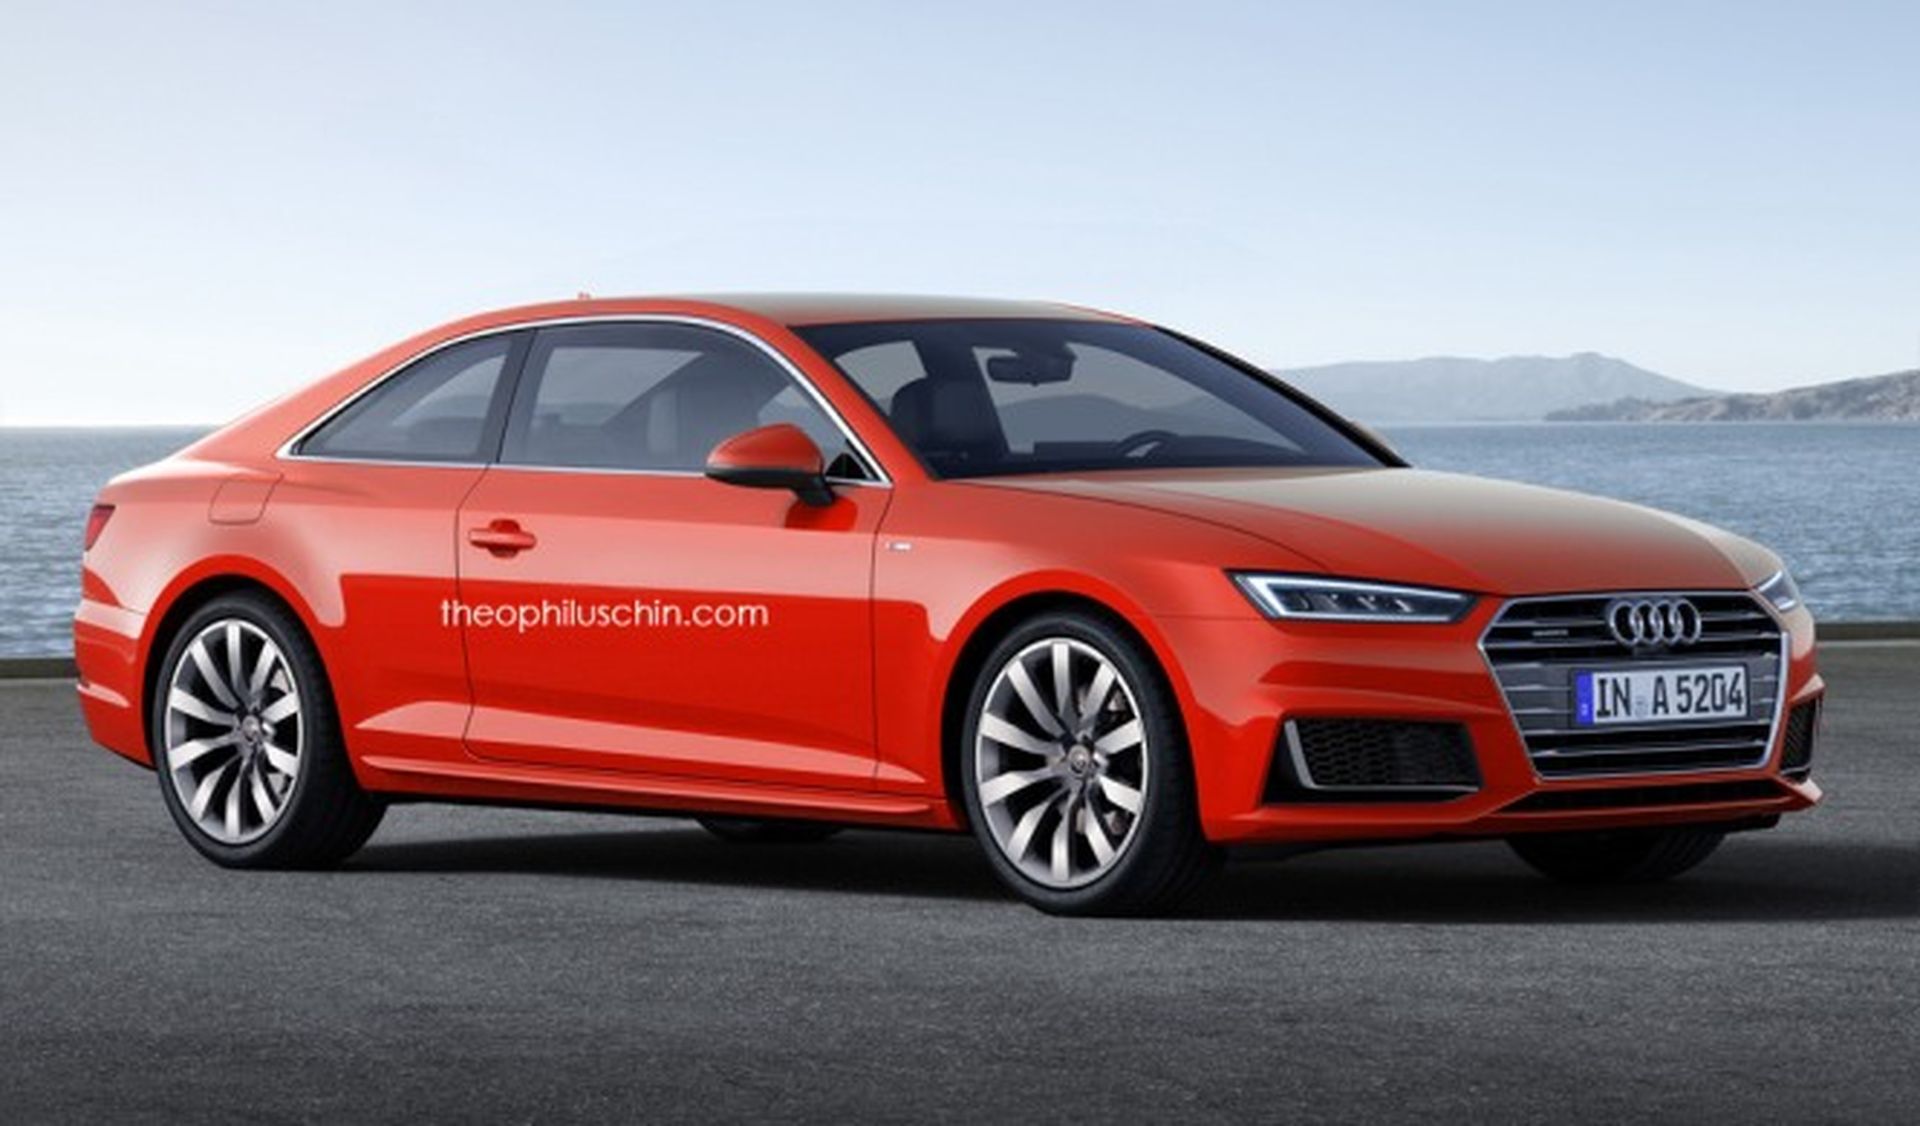 Audi A5 2017 Theophilus Chin frontal